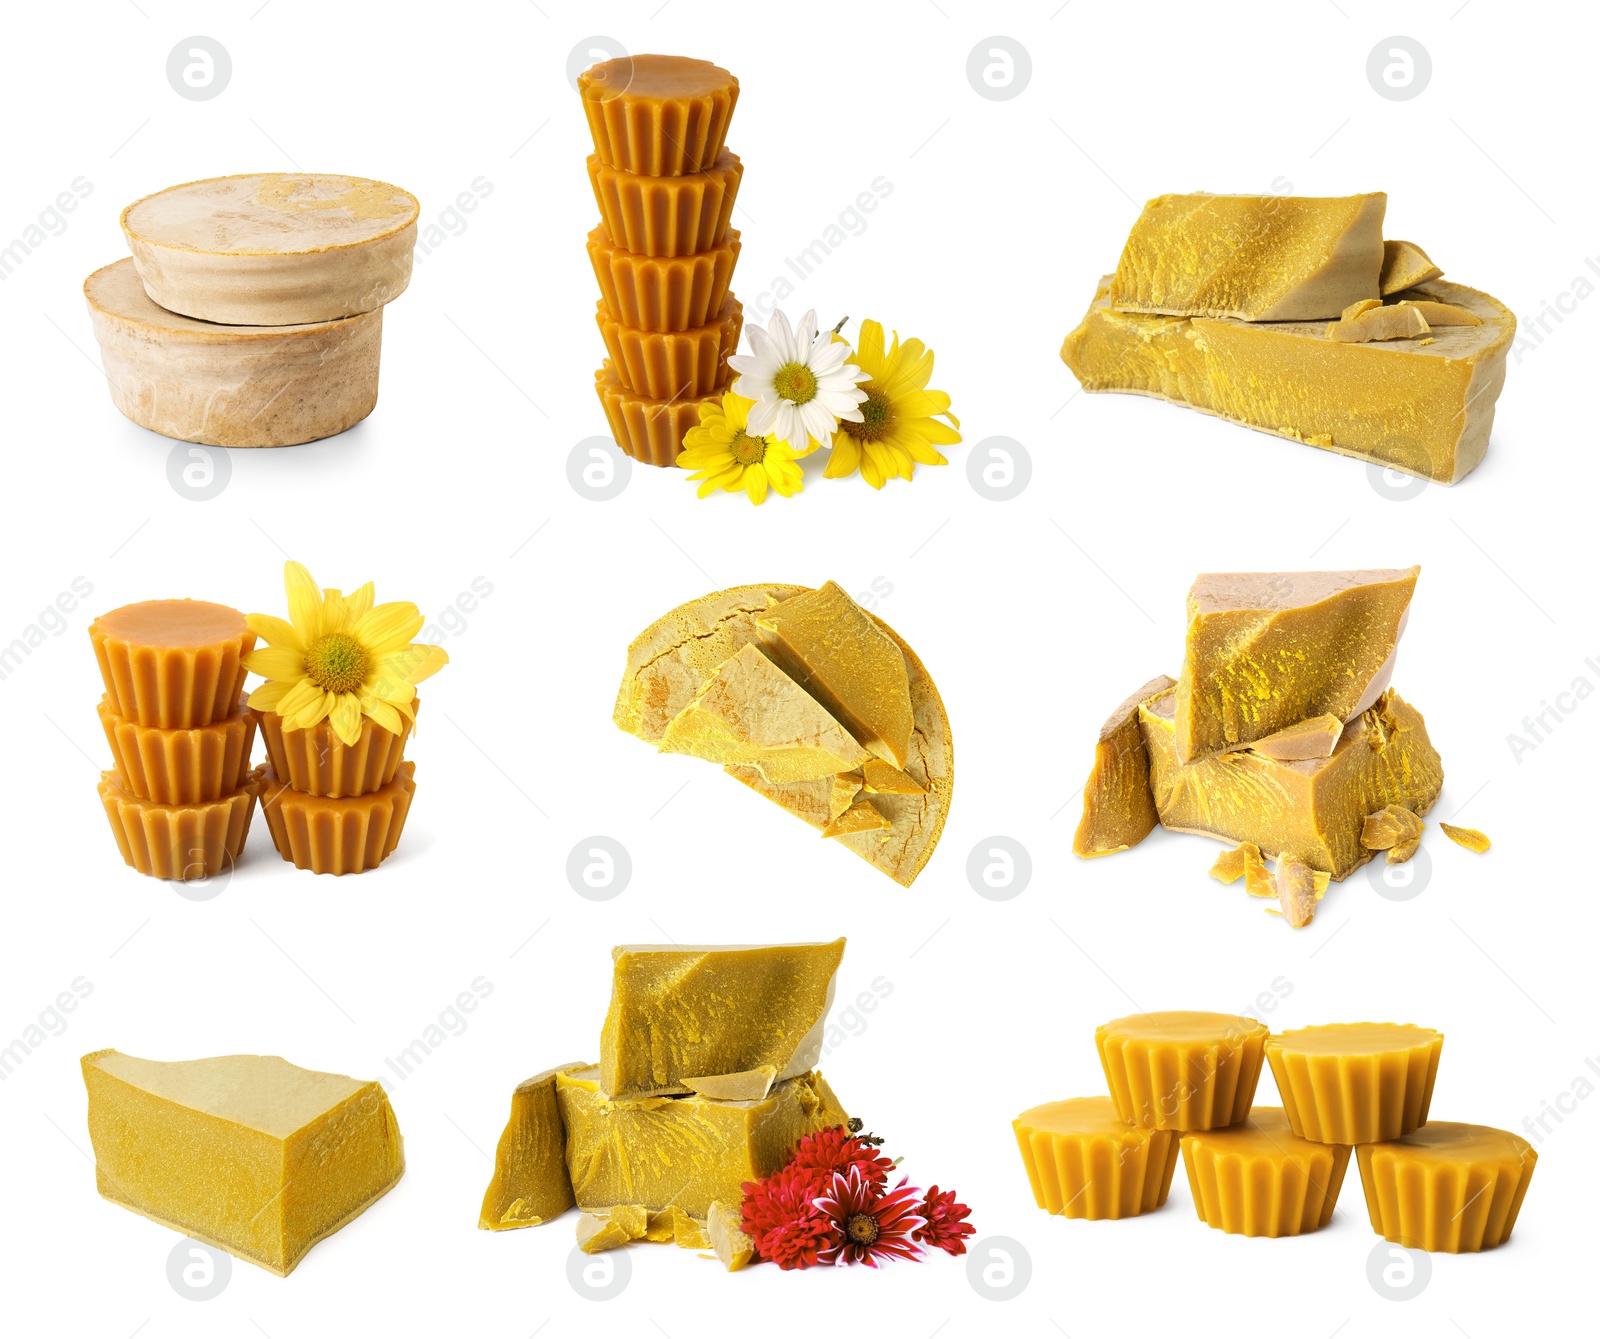 Image of Set with natural organic beeswax on white background